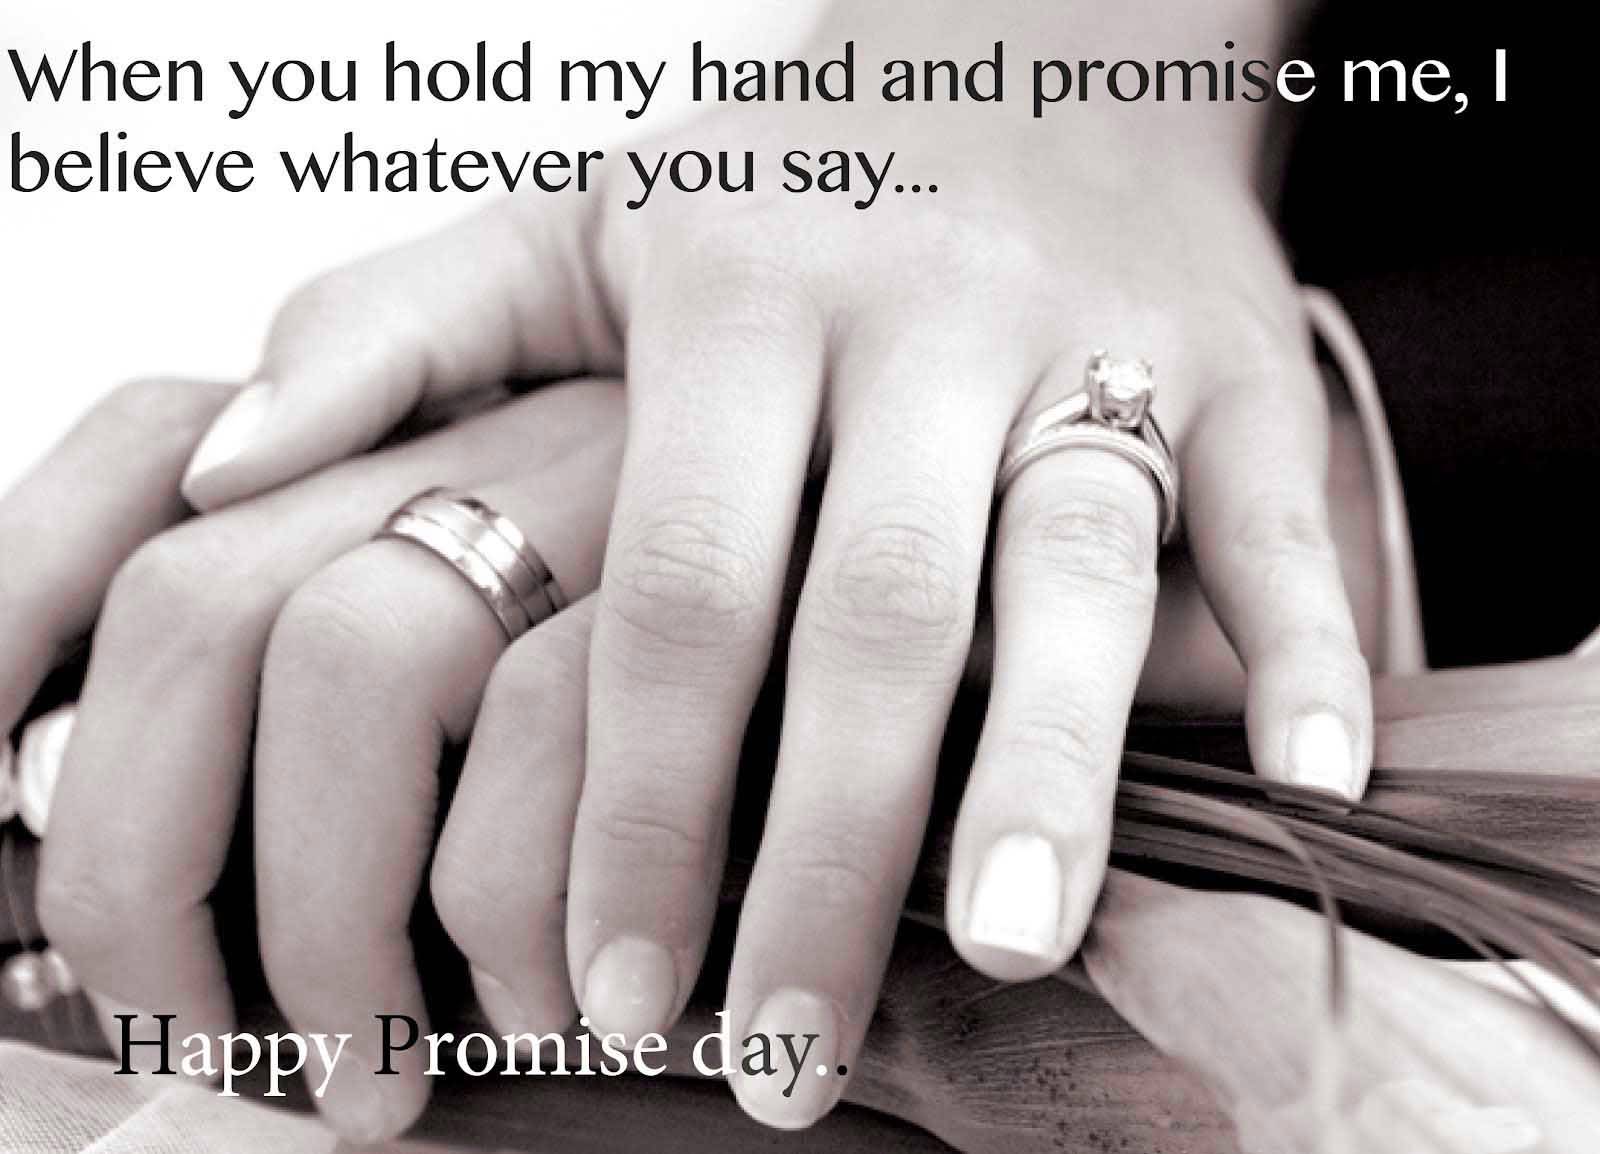 When You Hold My Hand And Promise Me, I Believe What You Say Happy Promise Day